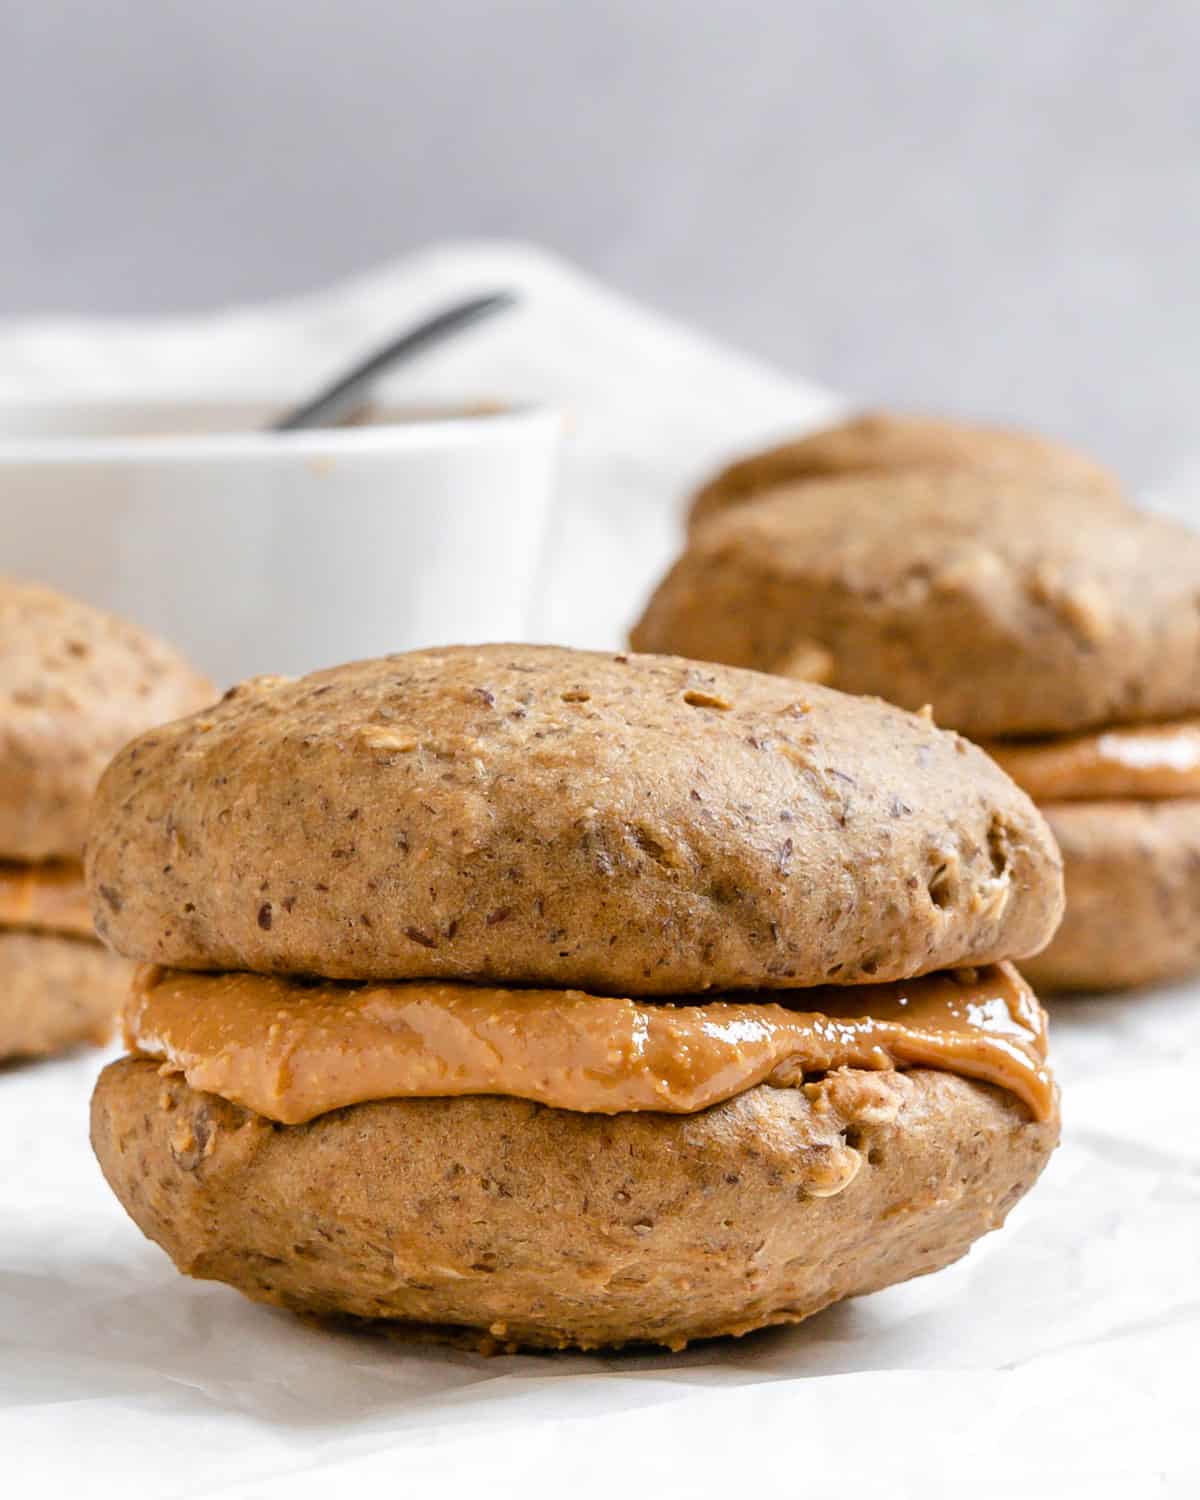 completed Vegan Peanut Butter Cookies [With Filling| Sandwich Cookies] on a white surface